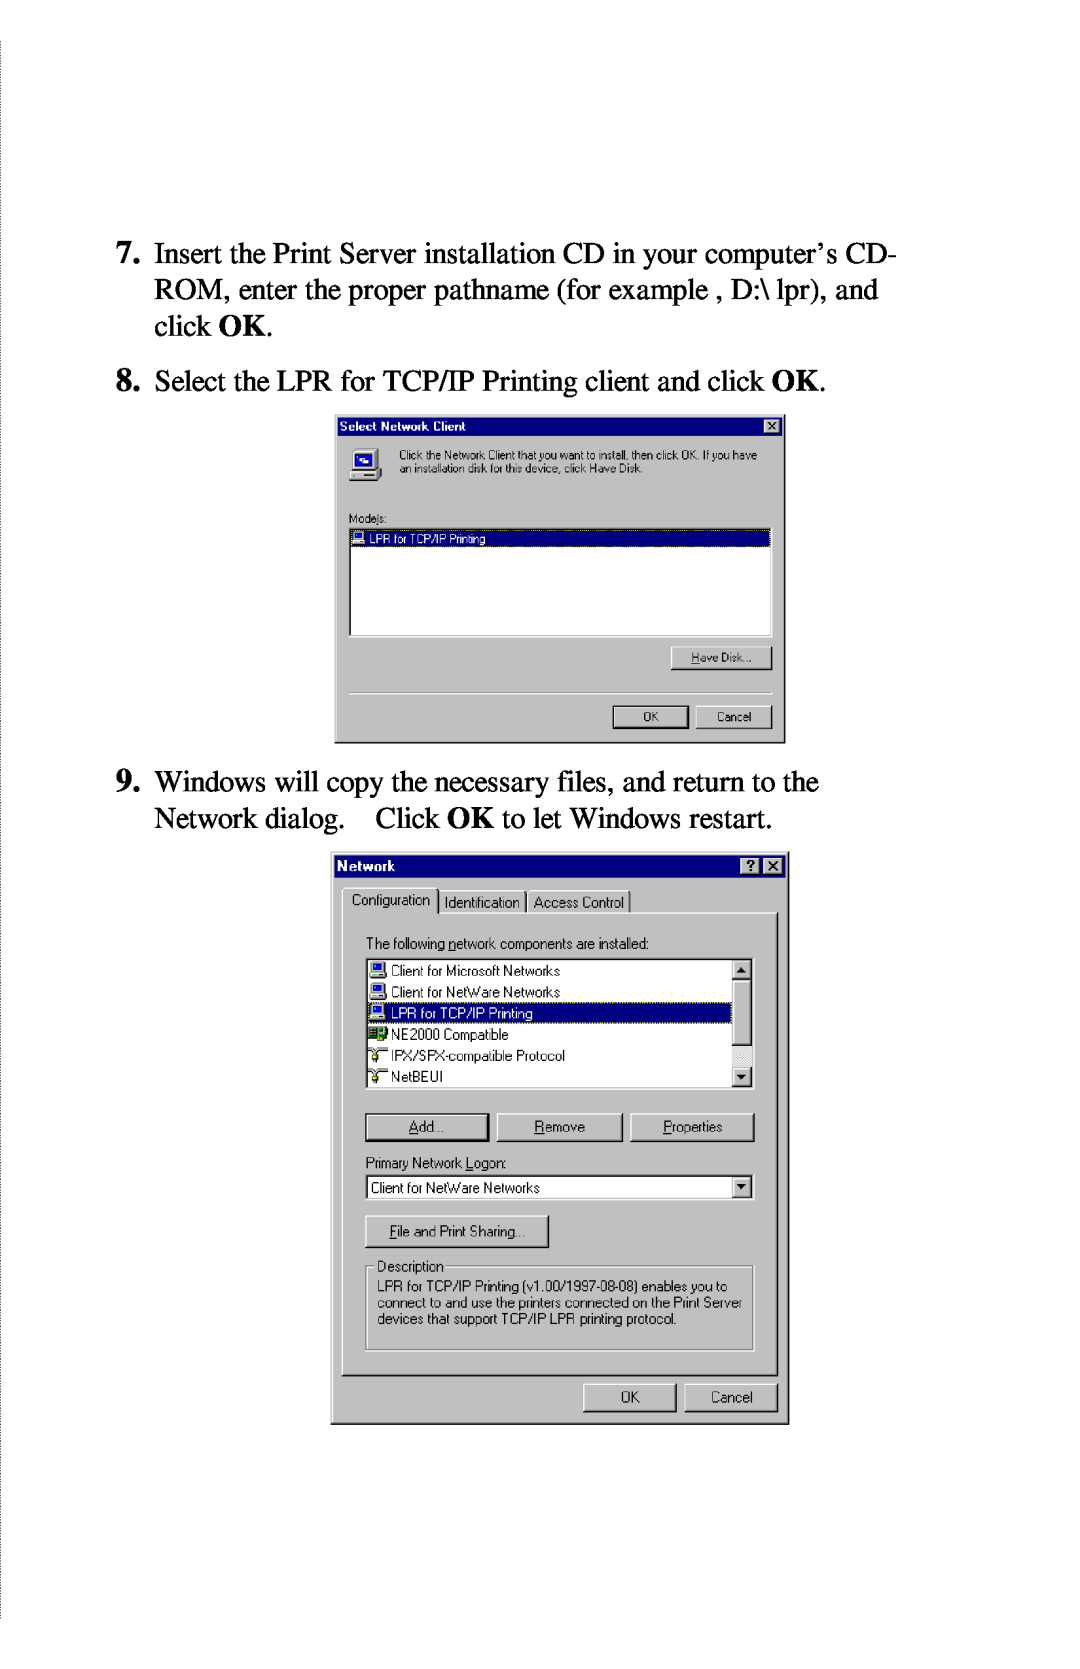 TRENDnet TE100-PIP manual Select the LPR for TCP/IP Printing client and click OK 